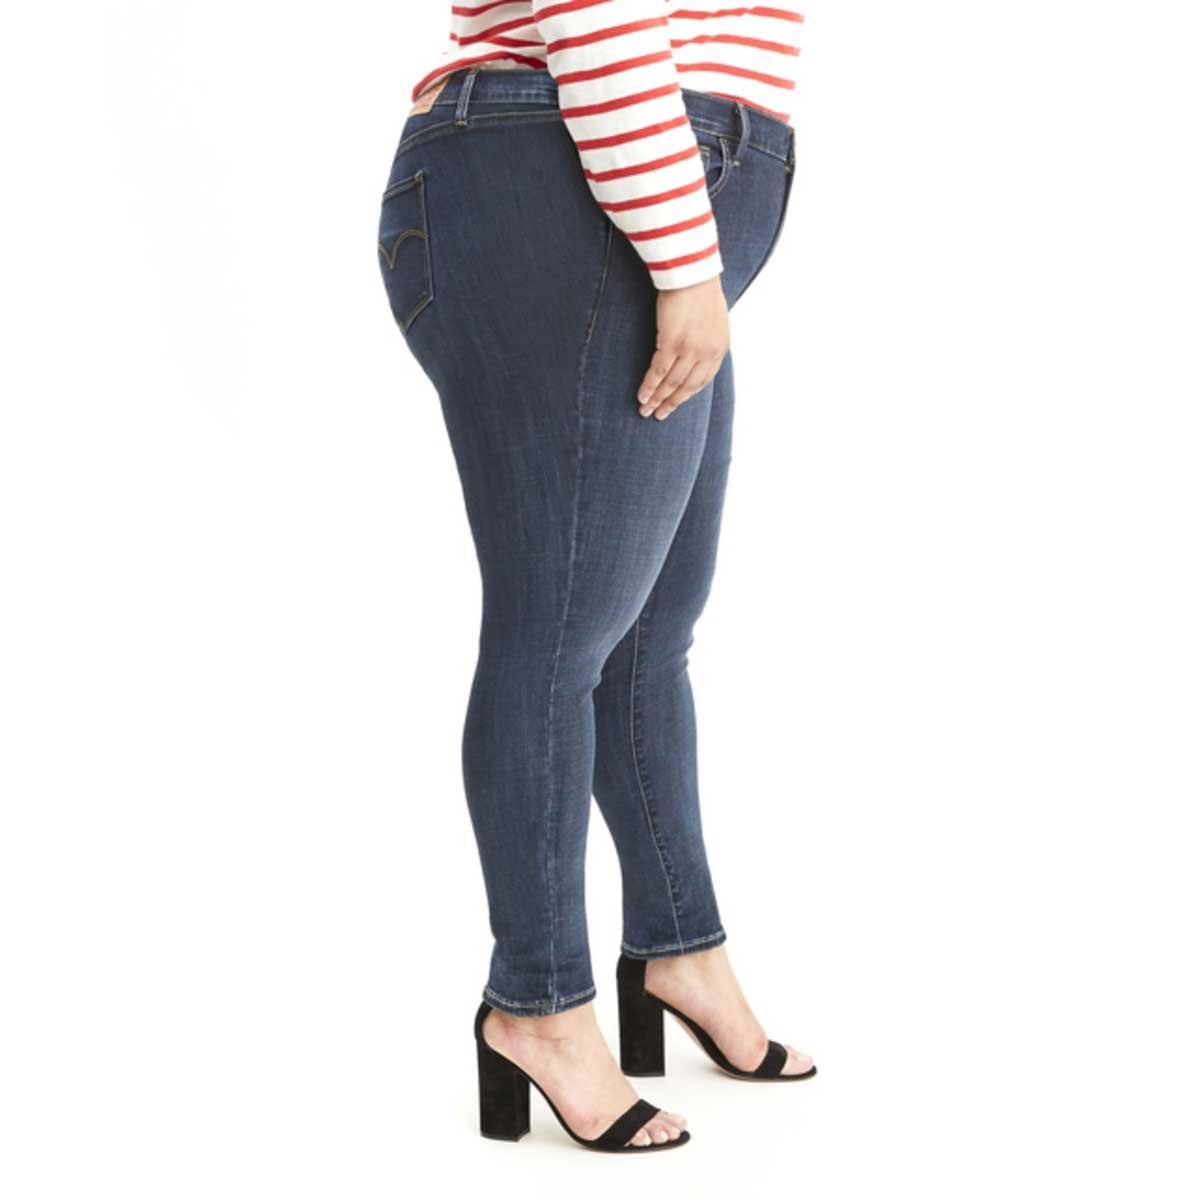 Jeans Plus 721 Highrise Skinny Levi's para Mujer